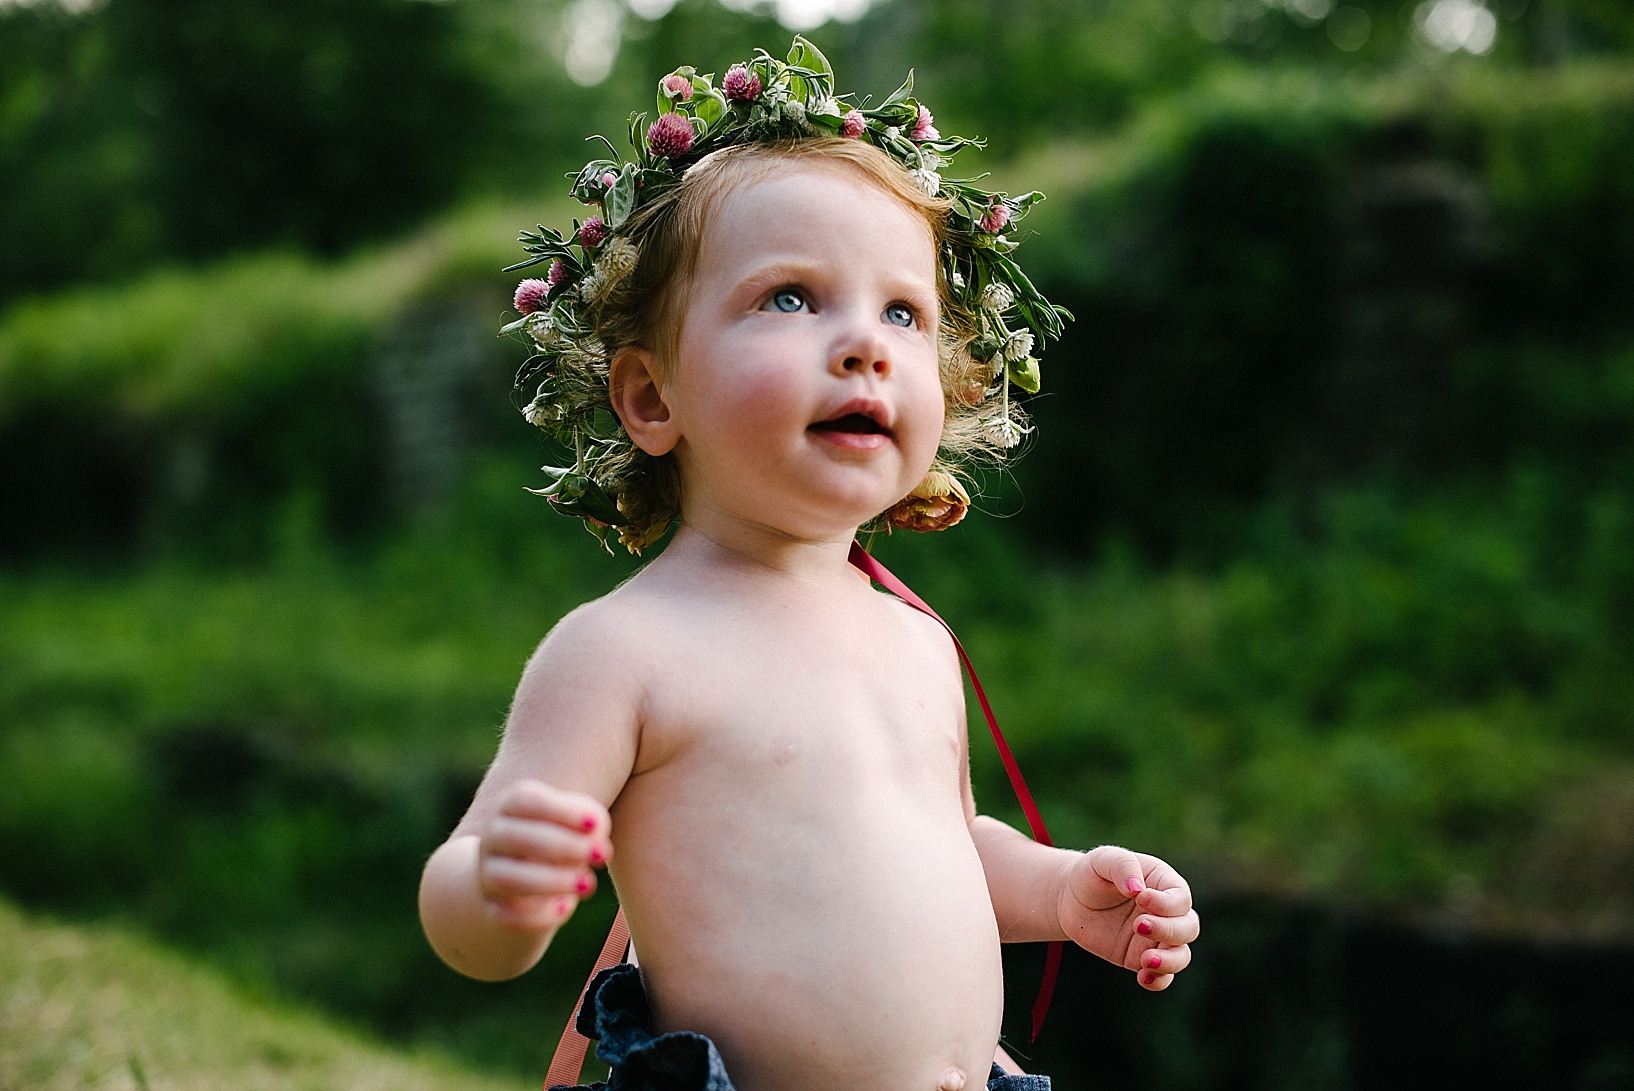 little girl with no shirt wearing floral crown